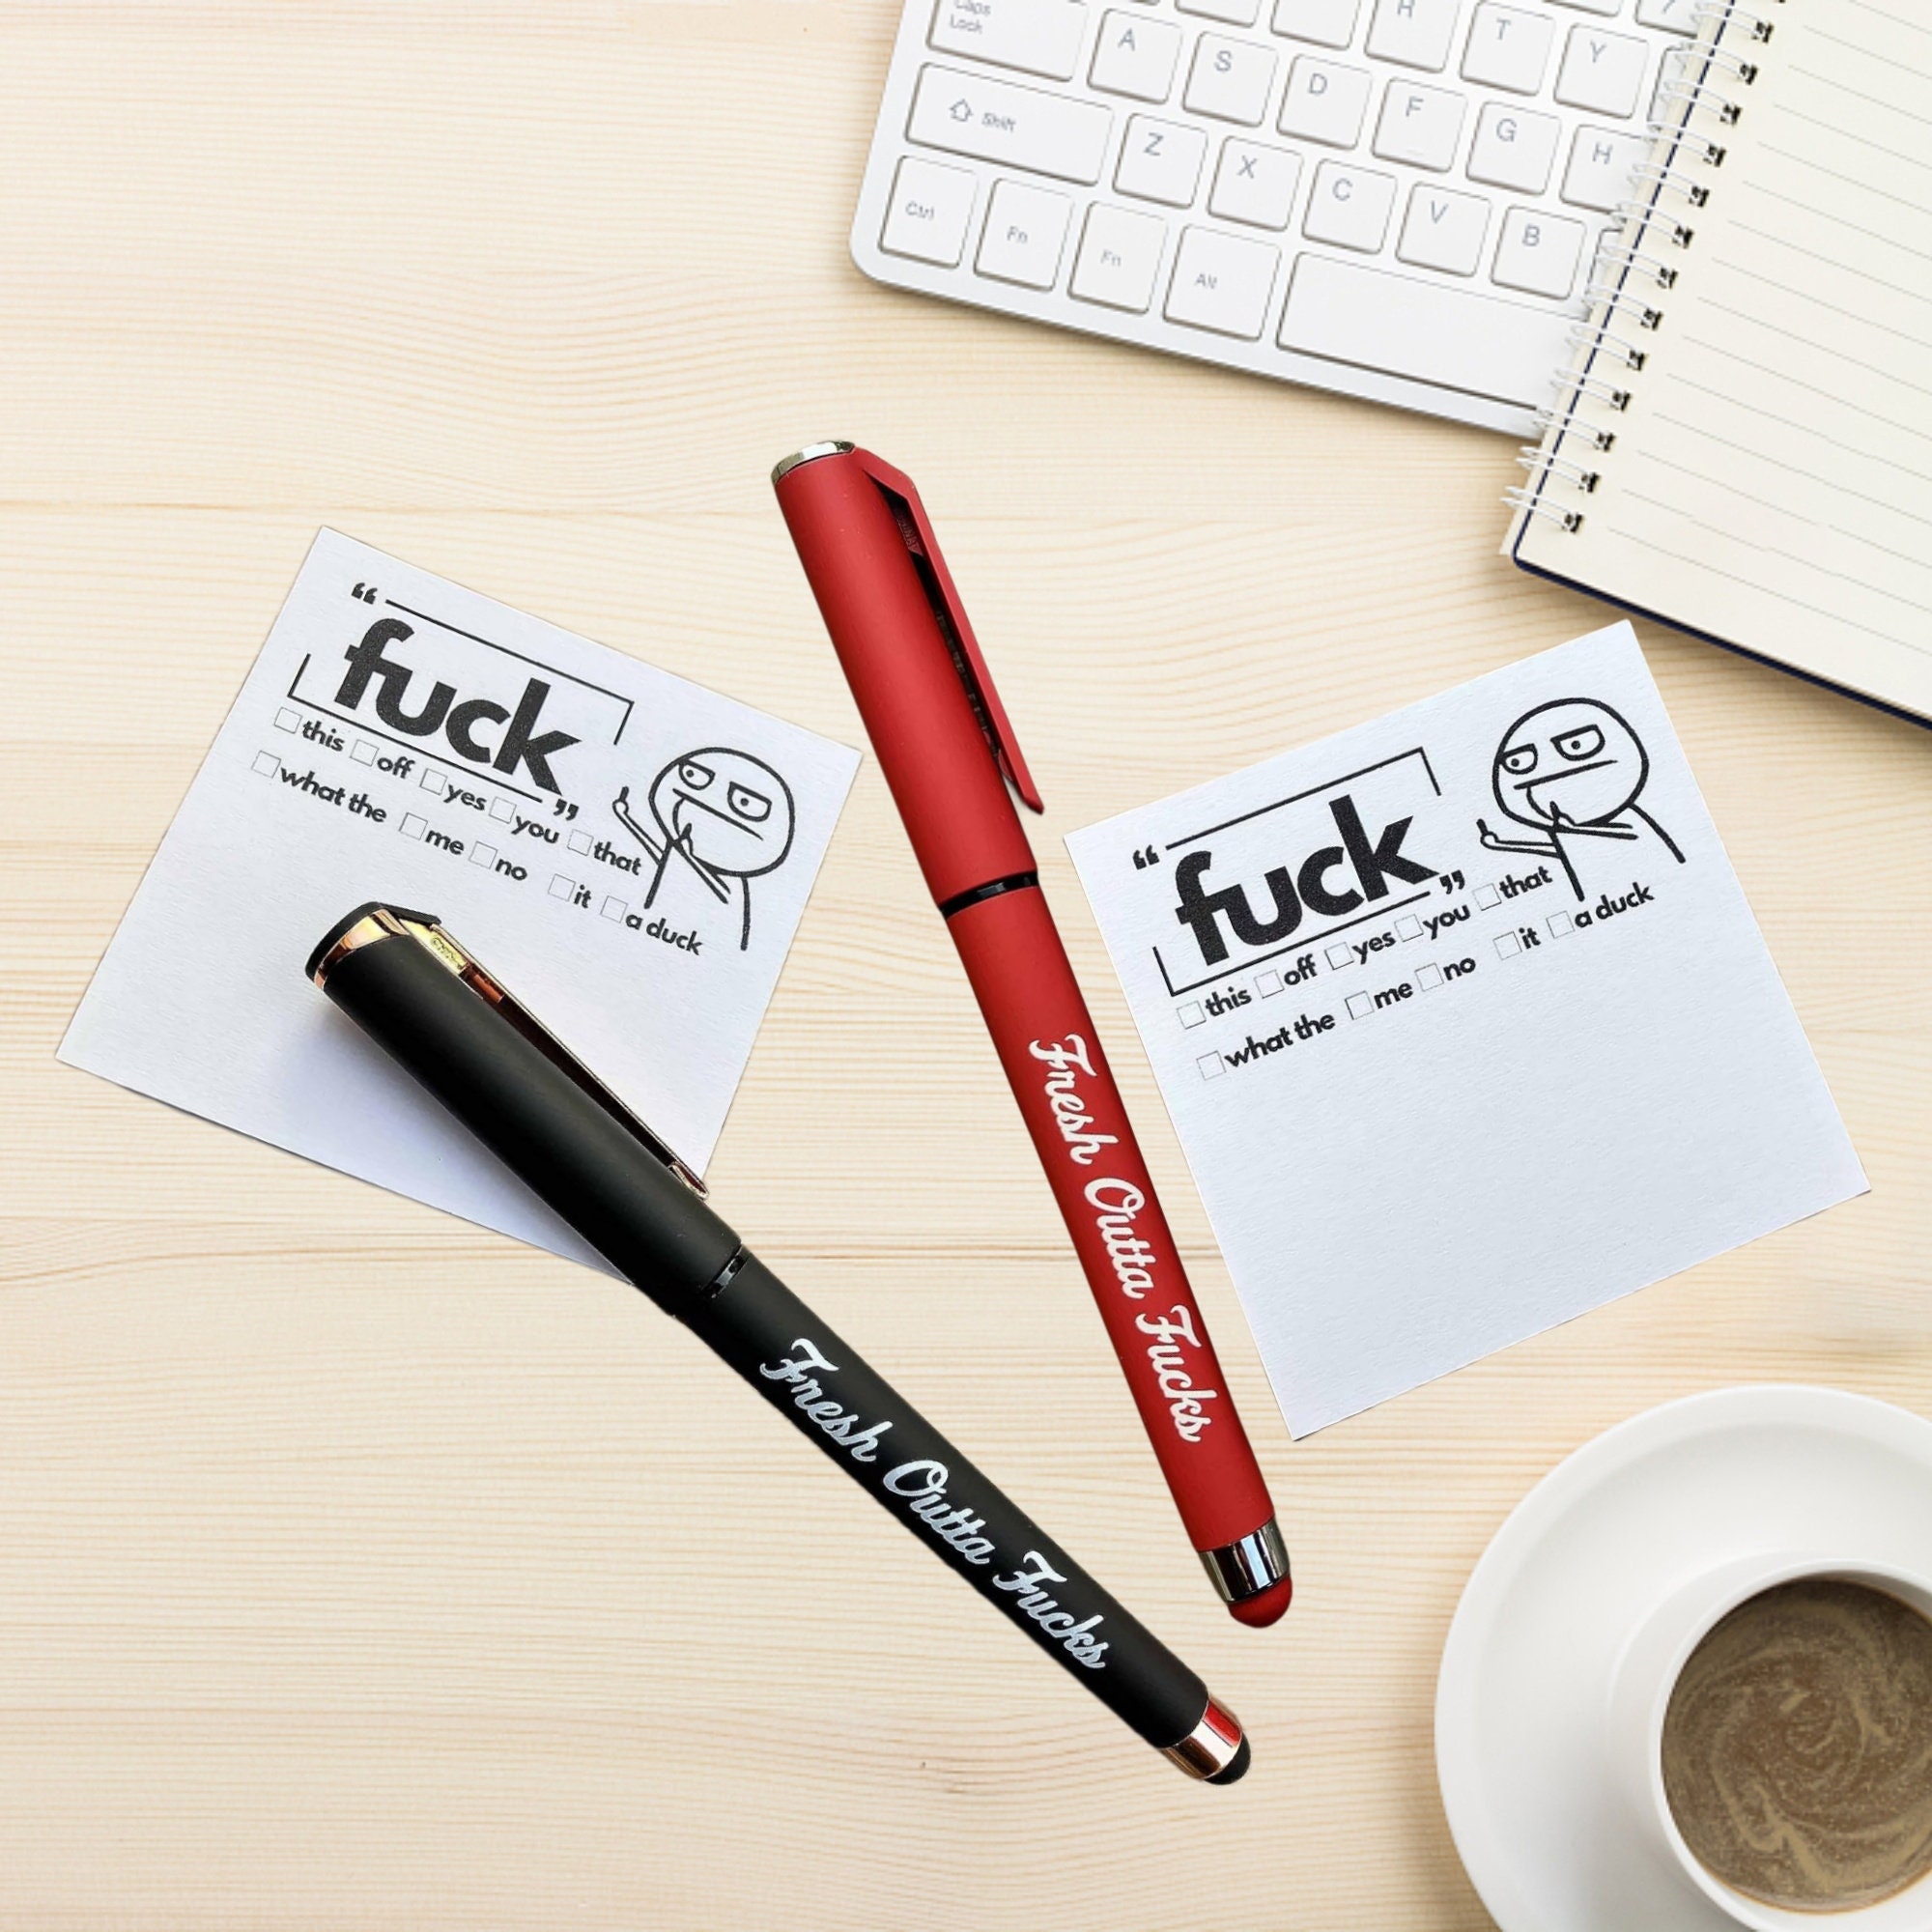 Fresh Outta Fucks Pad and Pen, Fresh Out of Fcks Pen Set, Black Post It  Notes, Snarky Novelty Office Supplies (Red)